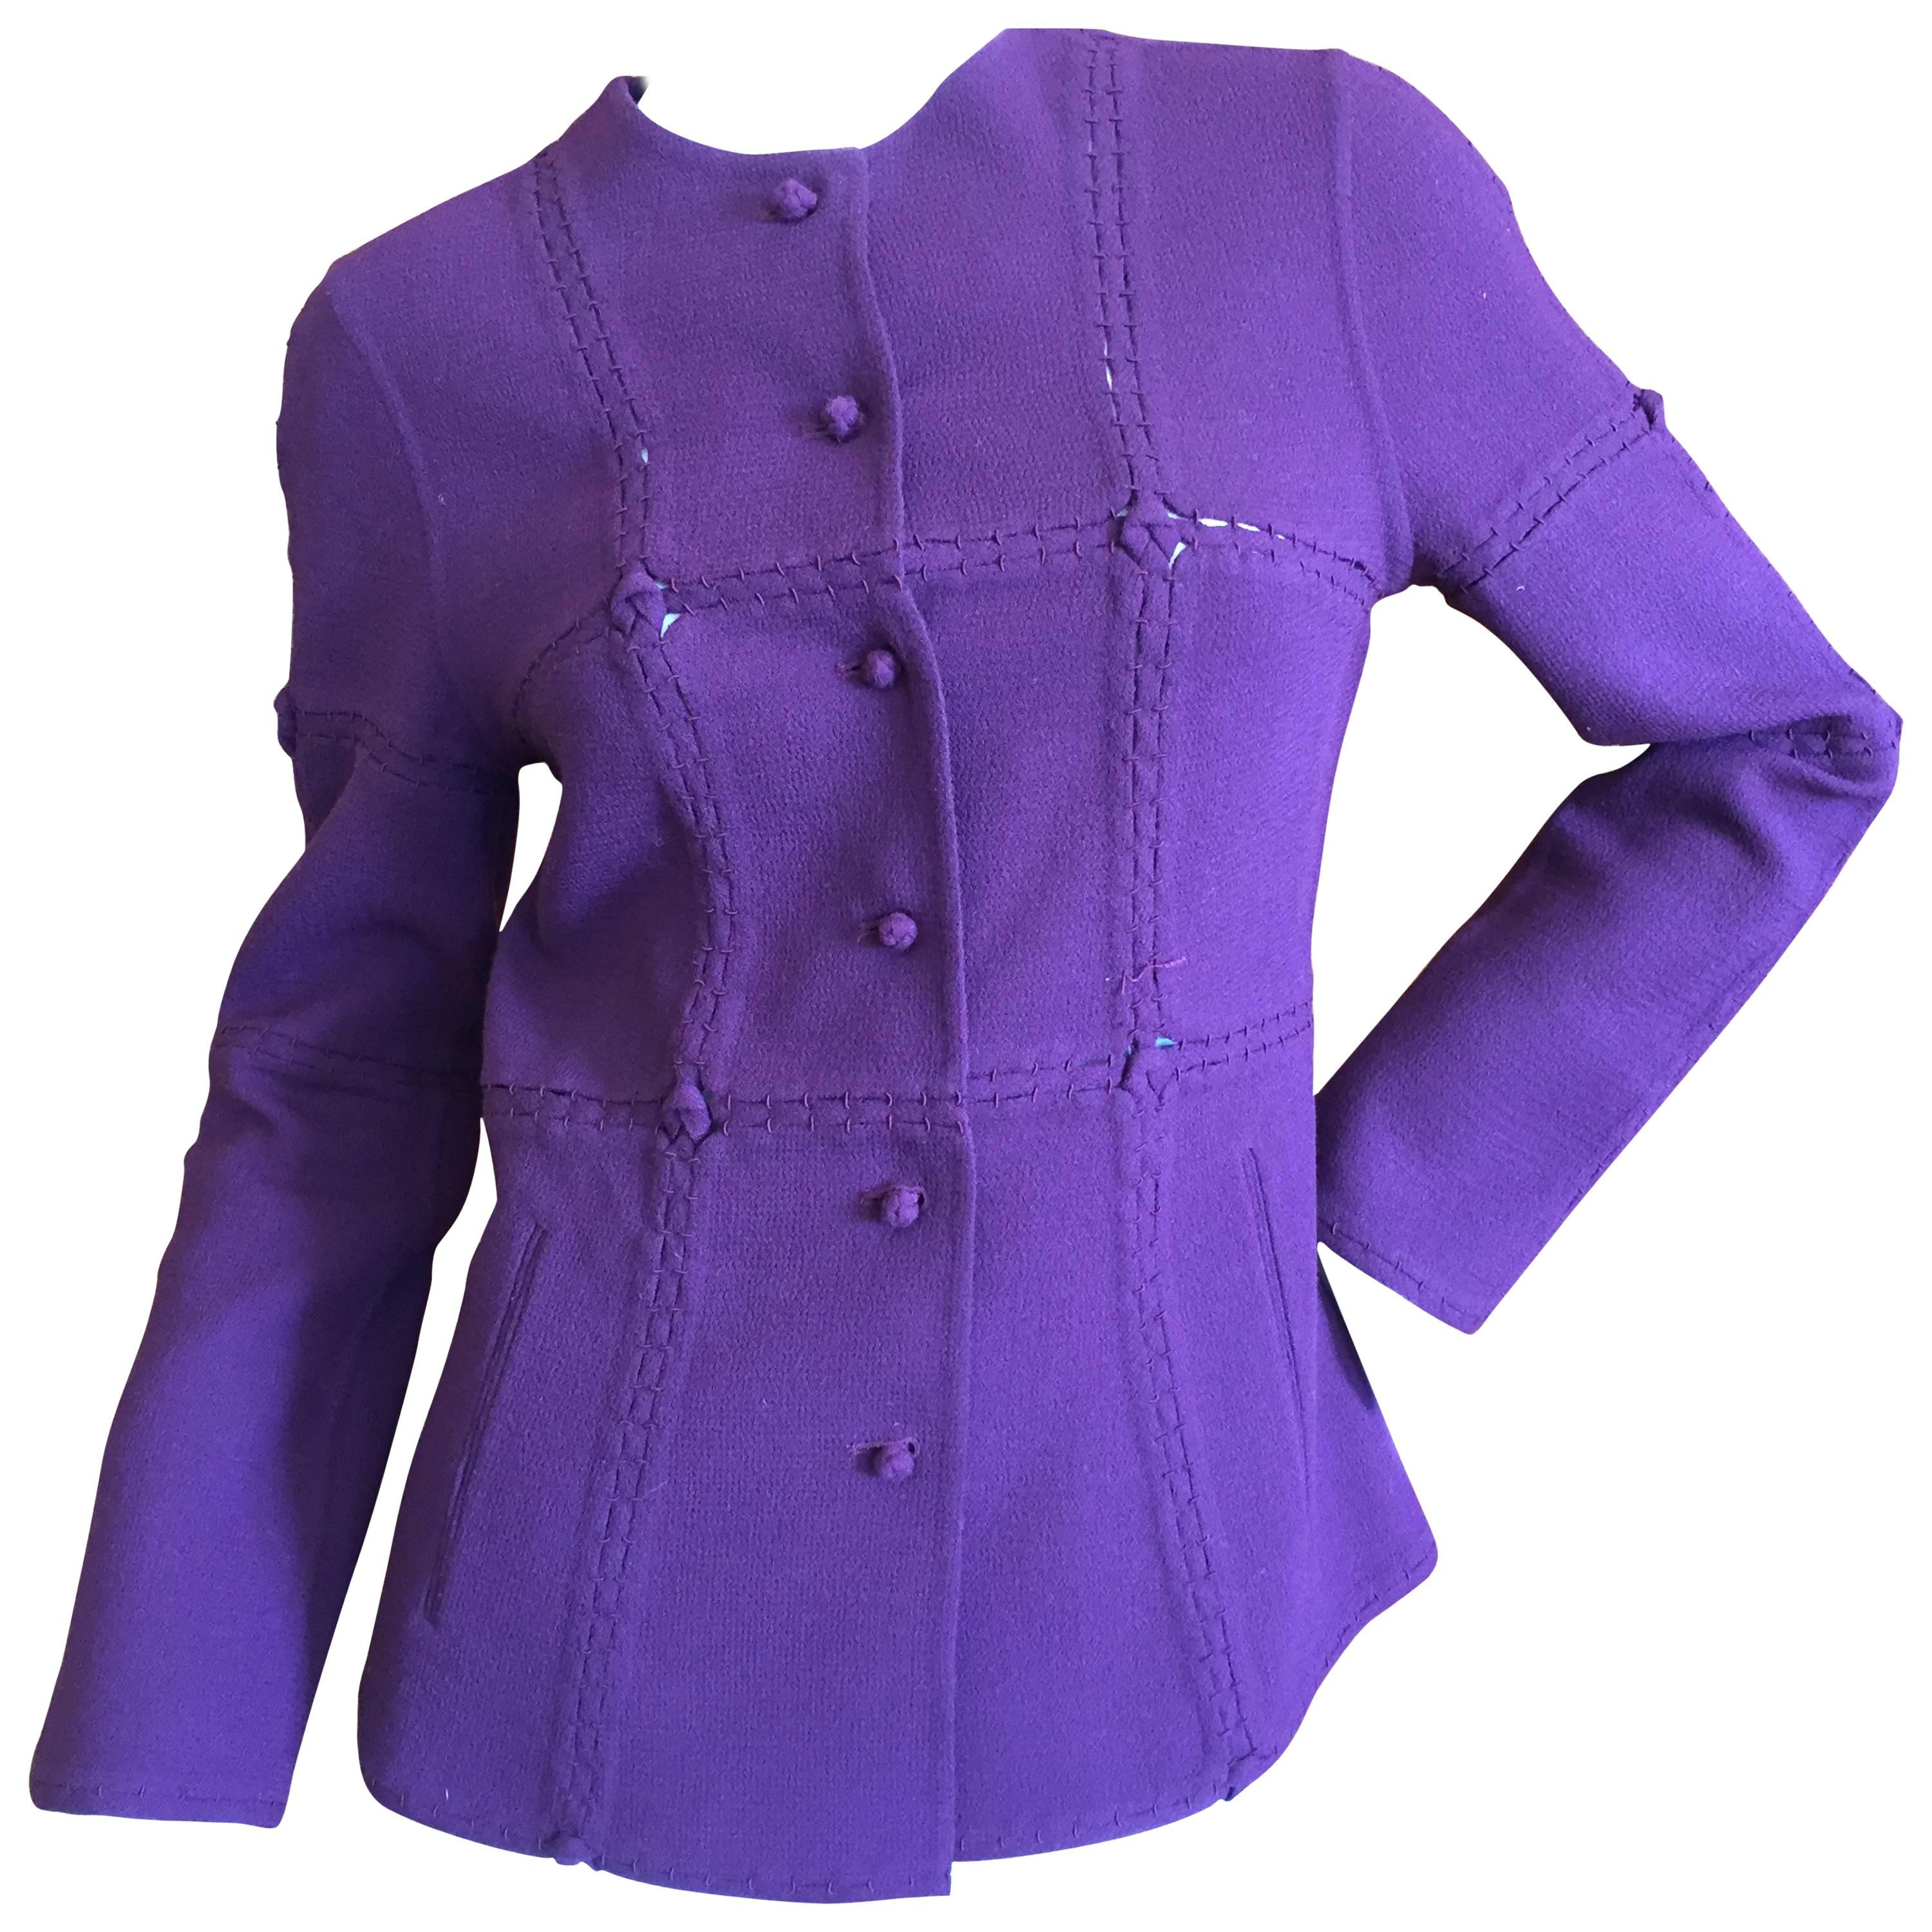 Chado Ralph Rucci Purple Jacket with Open Stitch Details  For Sale